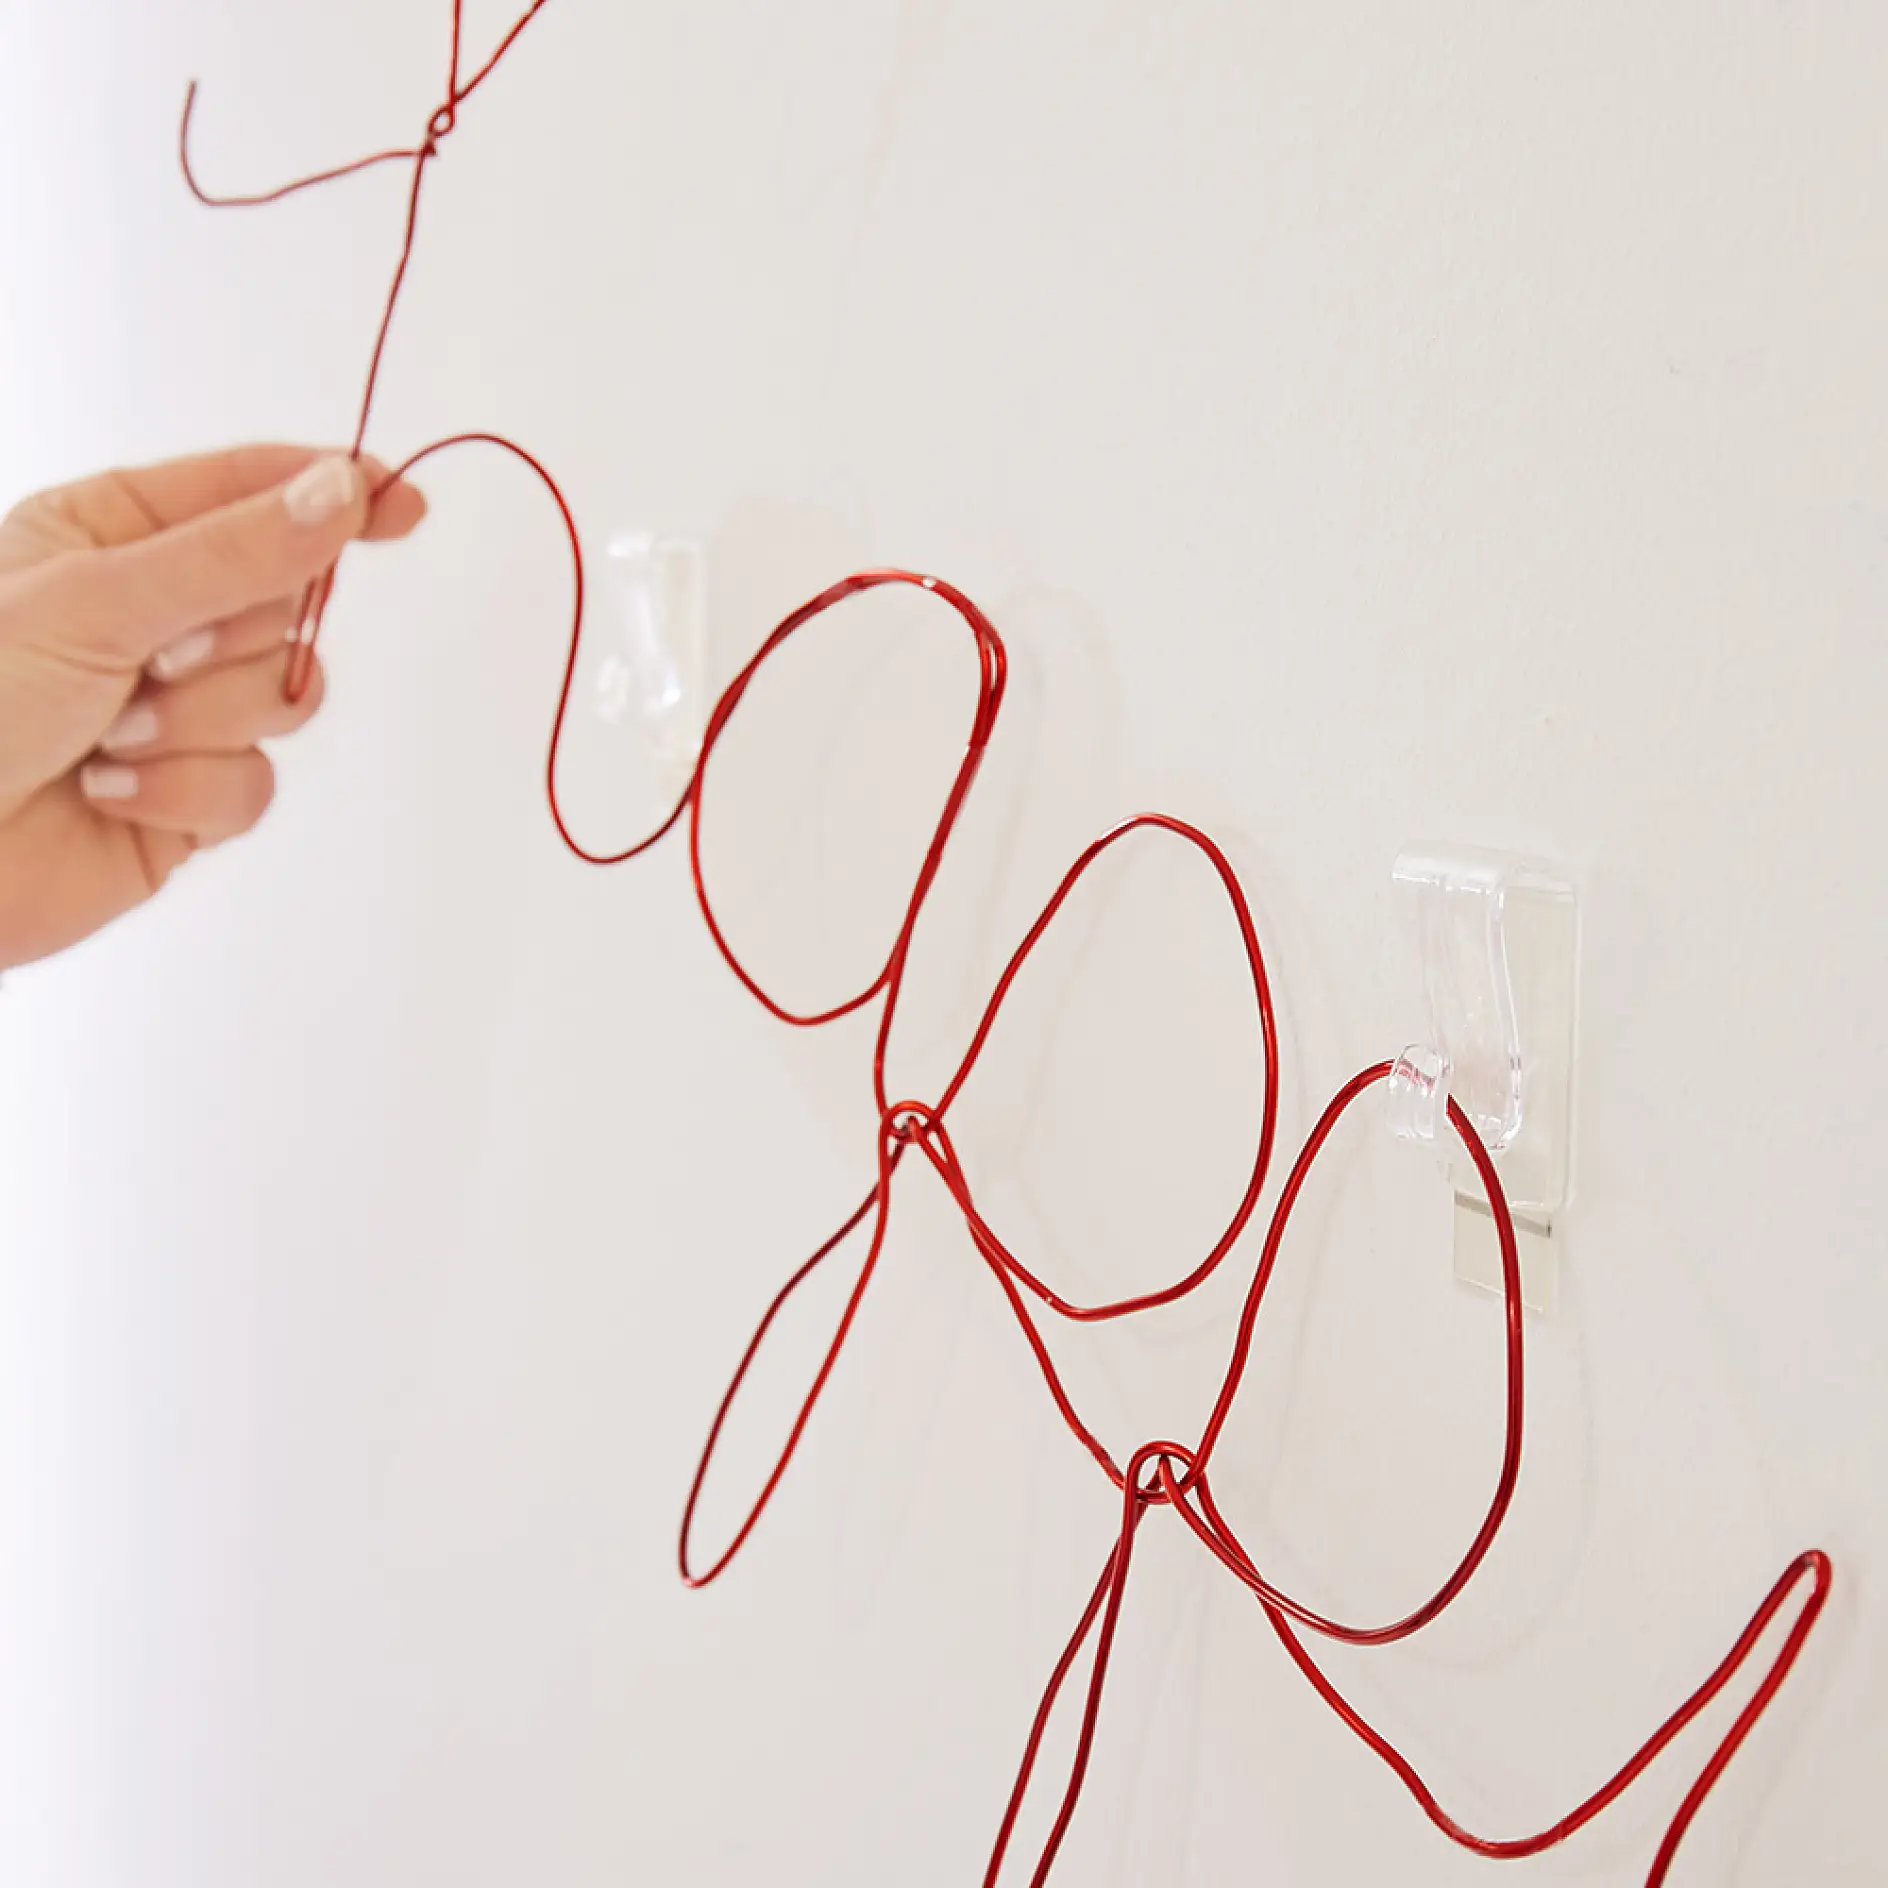 Hanging the completed wire writing using adhesive hooks